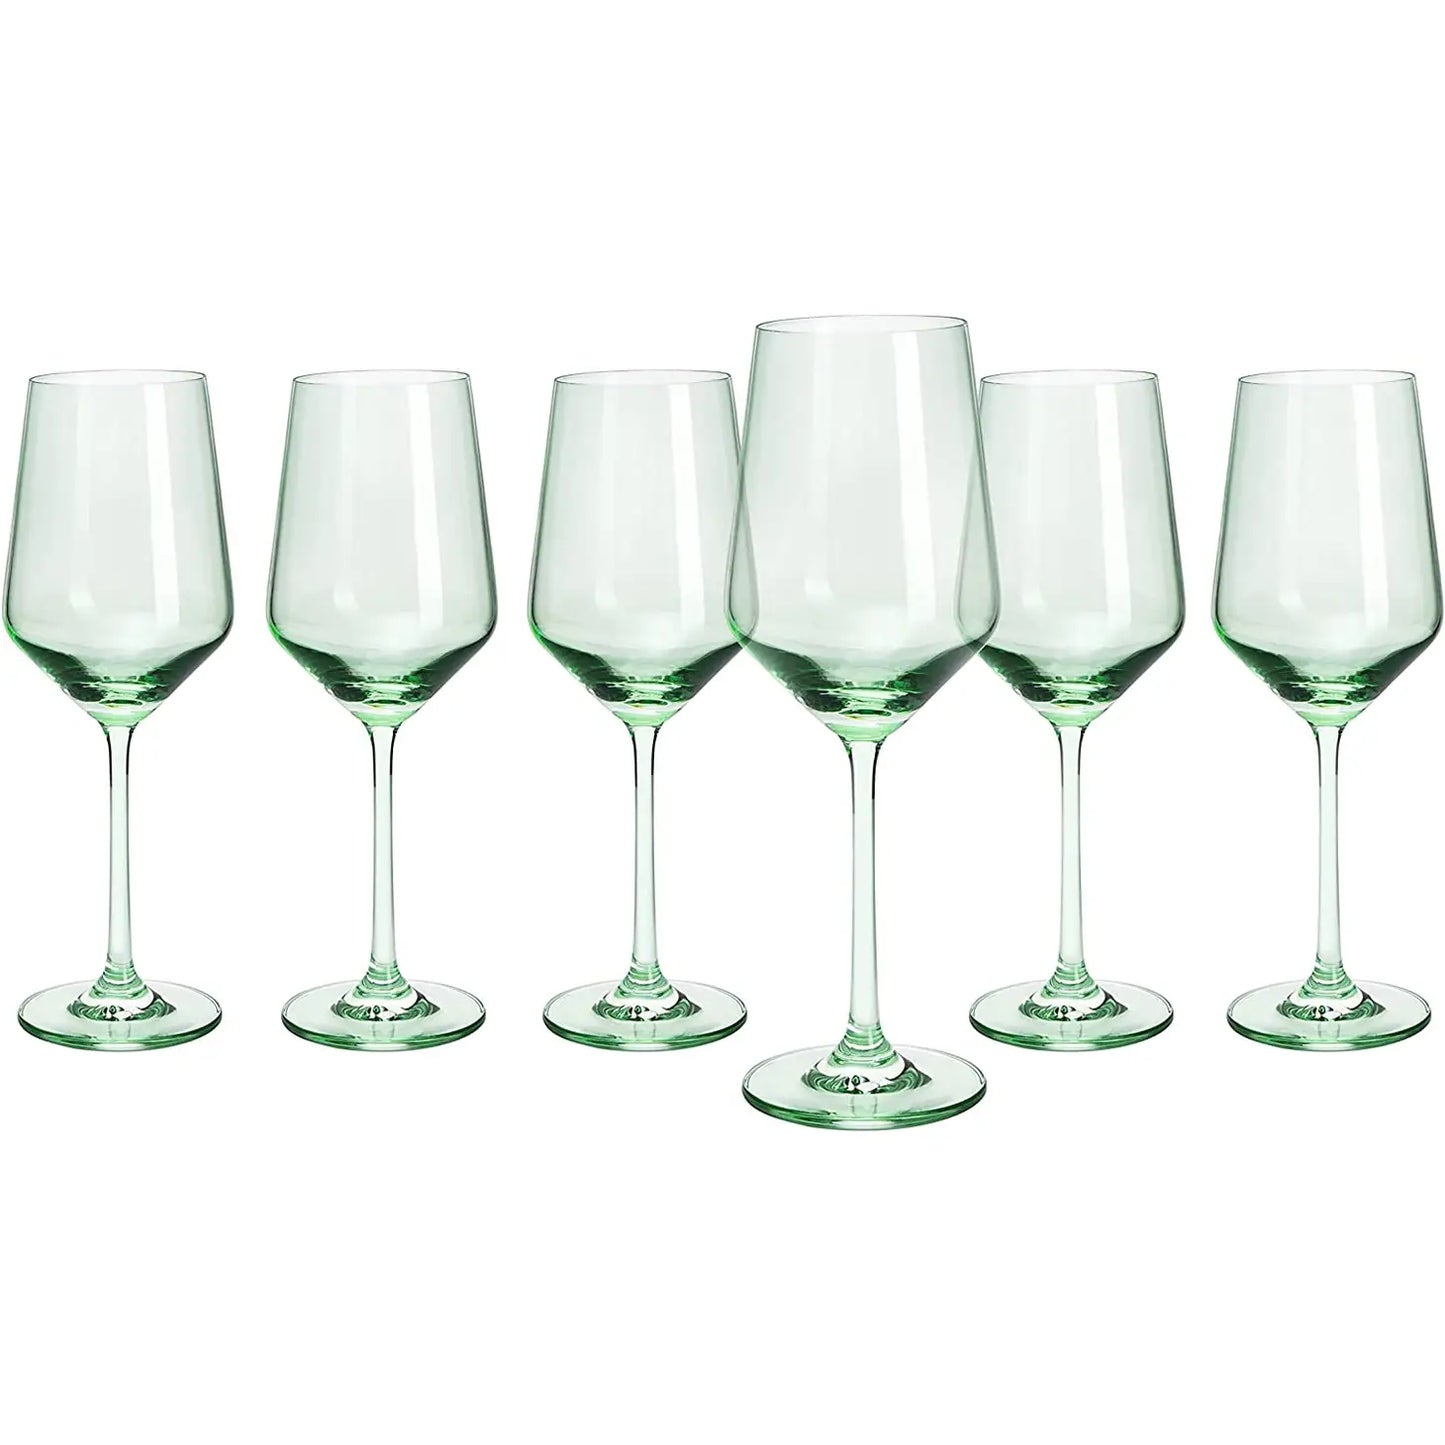 GREEN COLORED WINE GLASSES (SET OF 6)